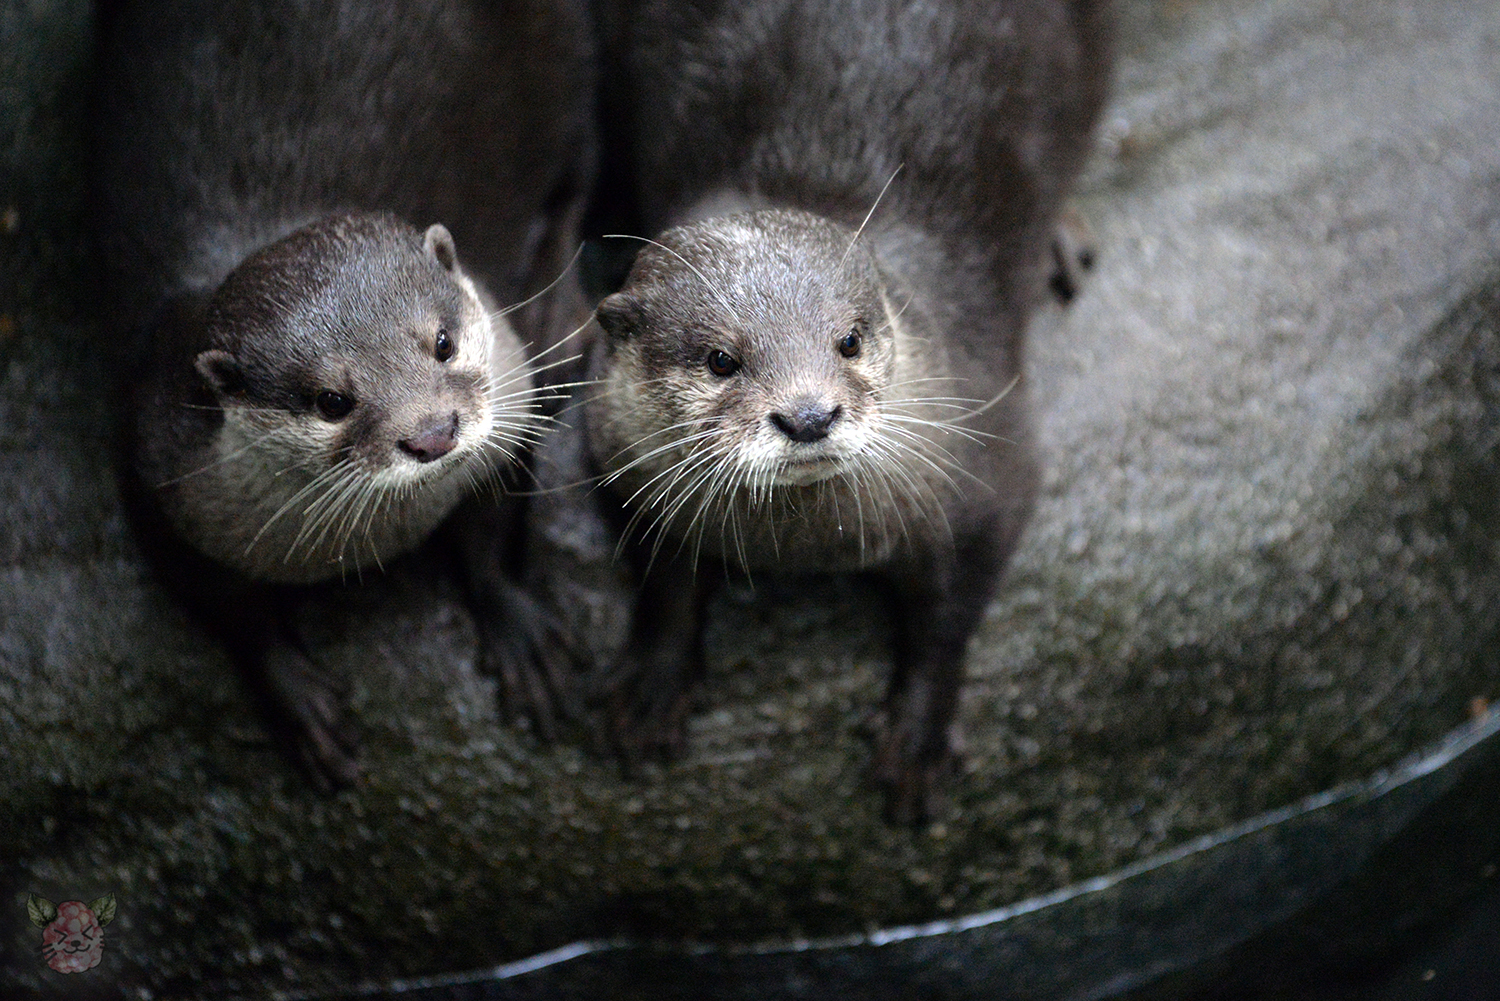 Hello from the Otters